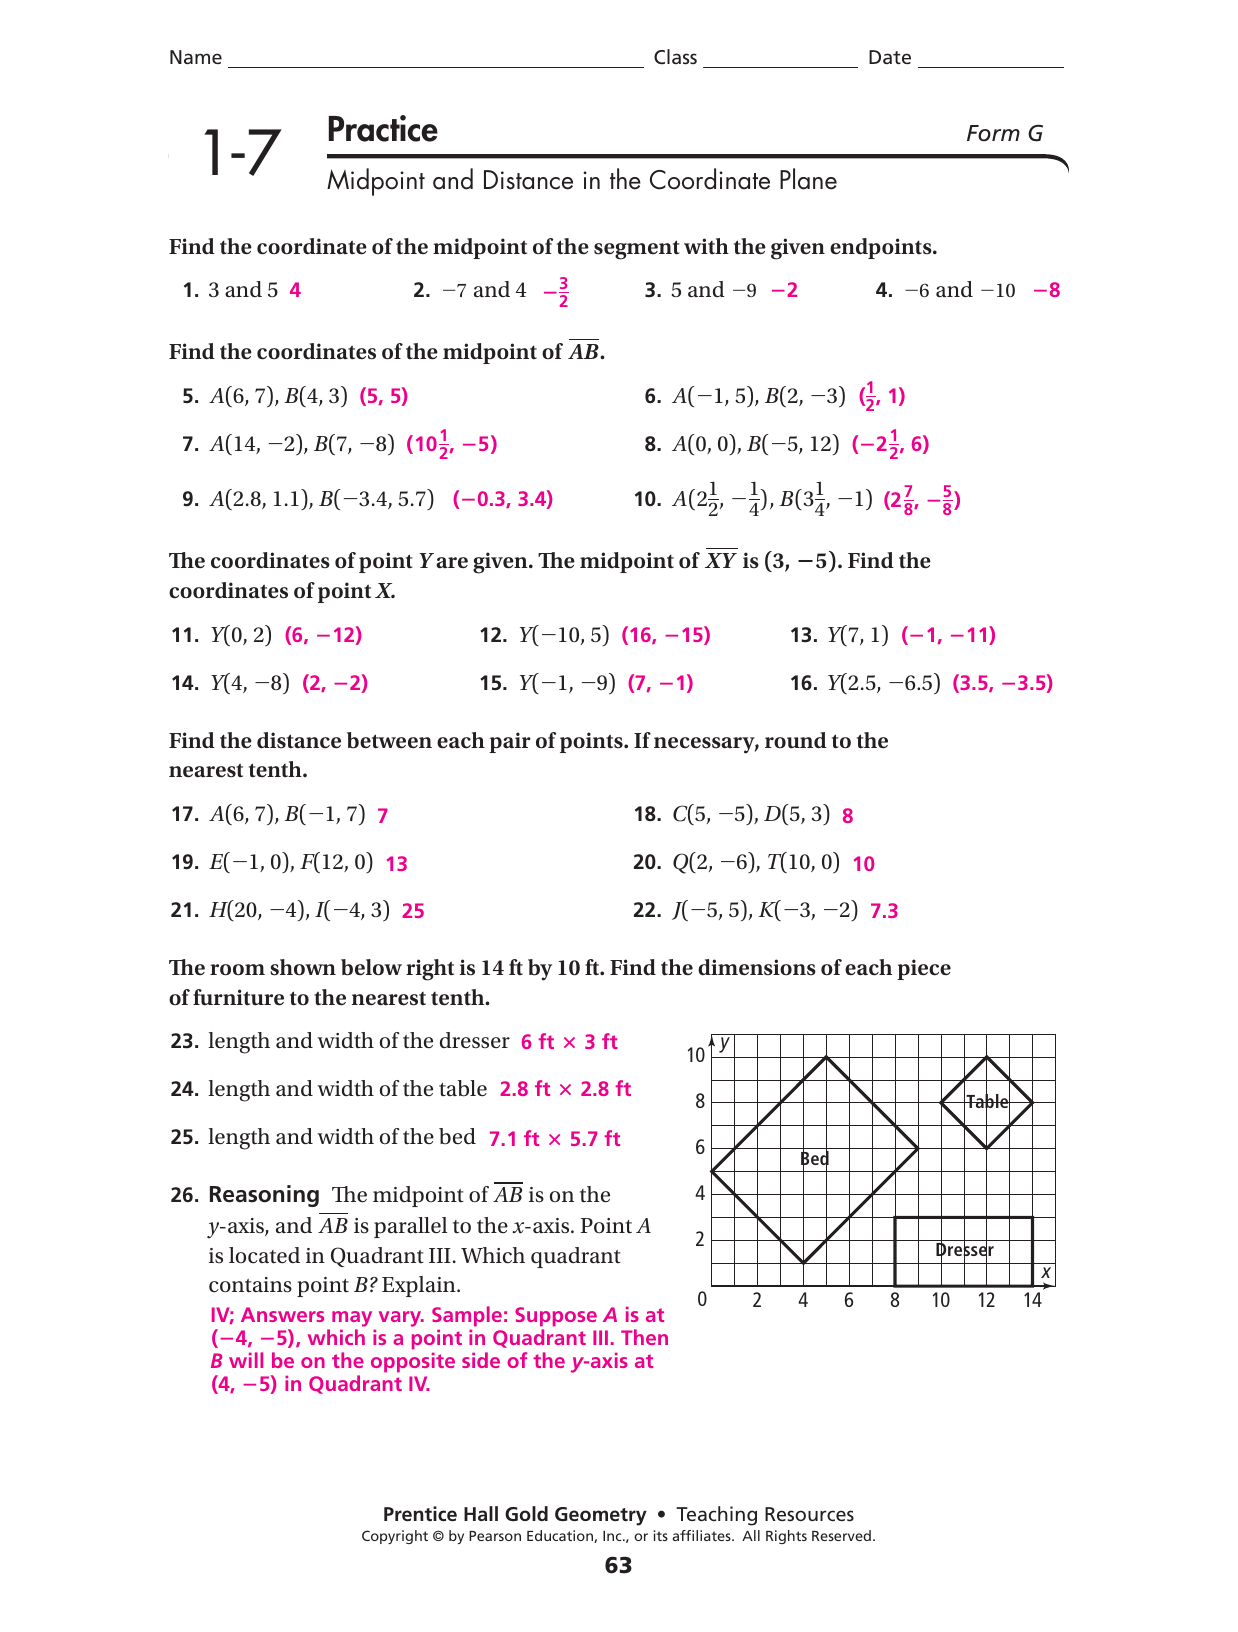 geometry-worksheet-1-3-distance-and-midpoints-answer-key